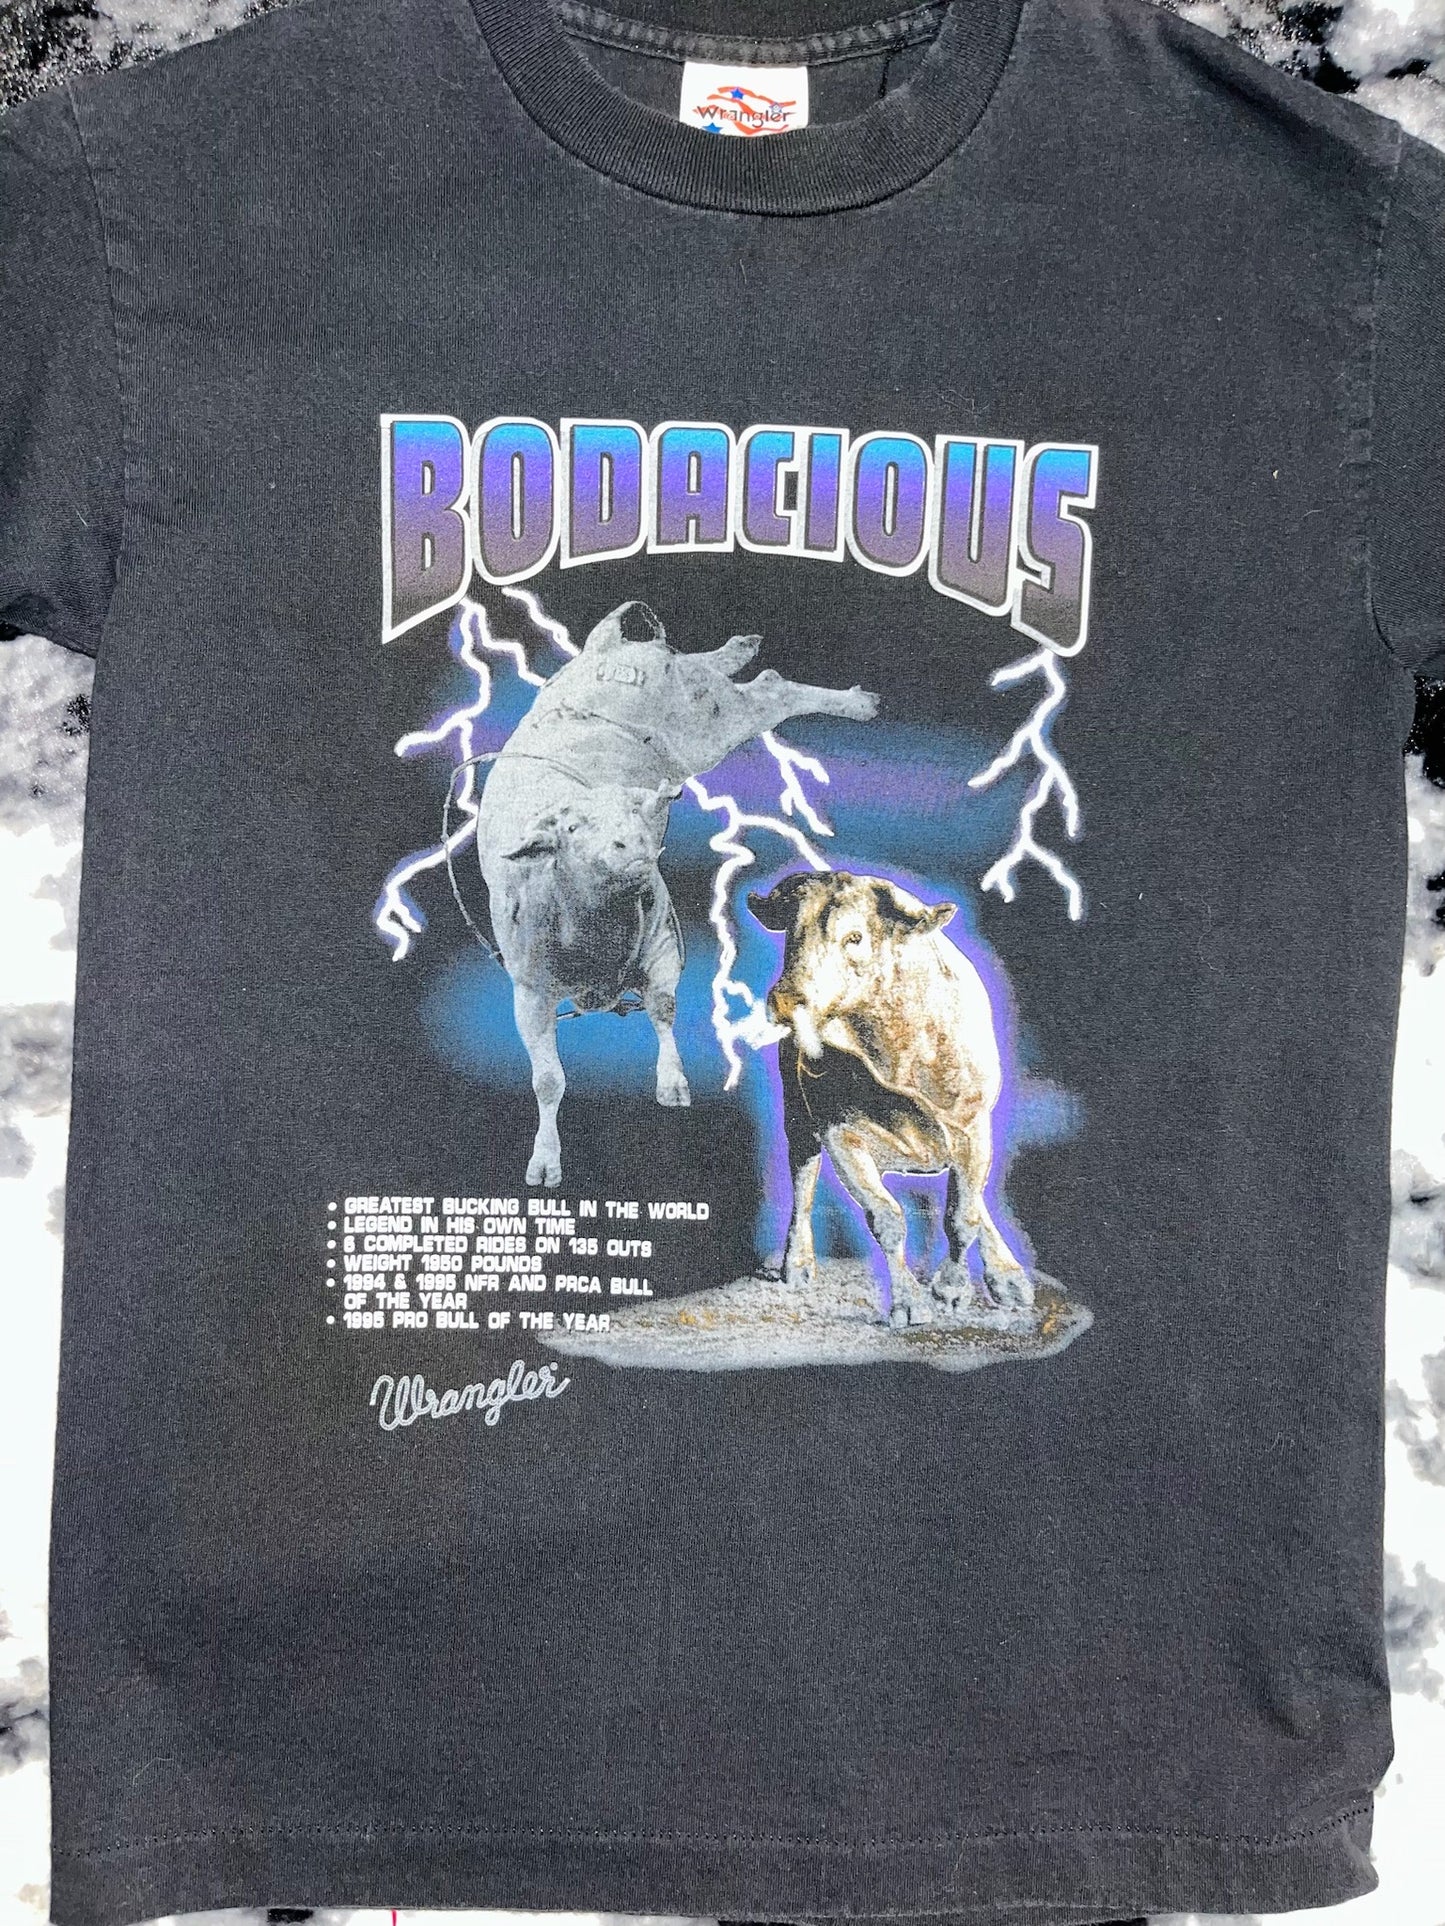 Youth Wrangler Bodacious Tee Shirt  Youth Large/Adult Small